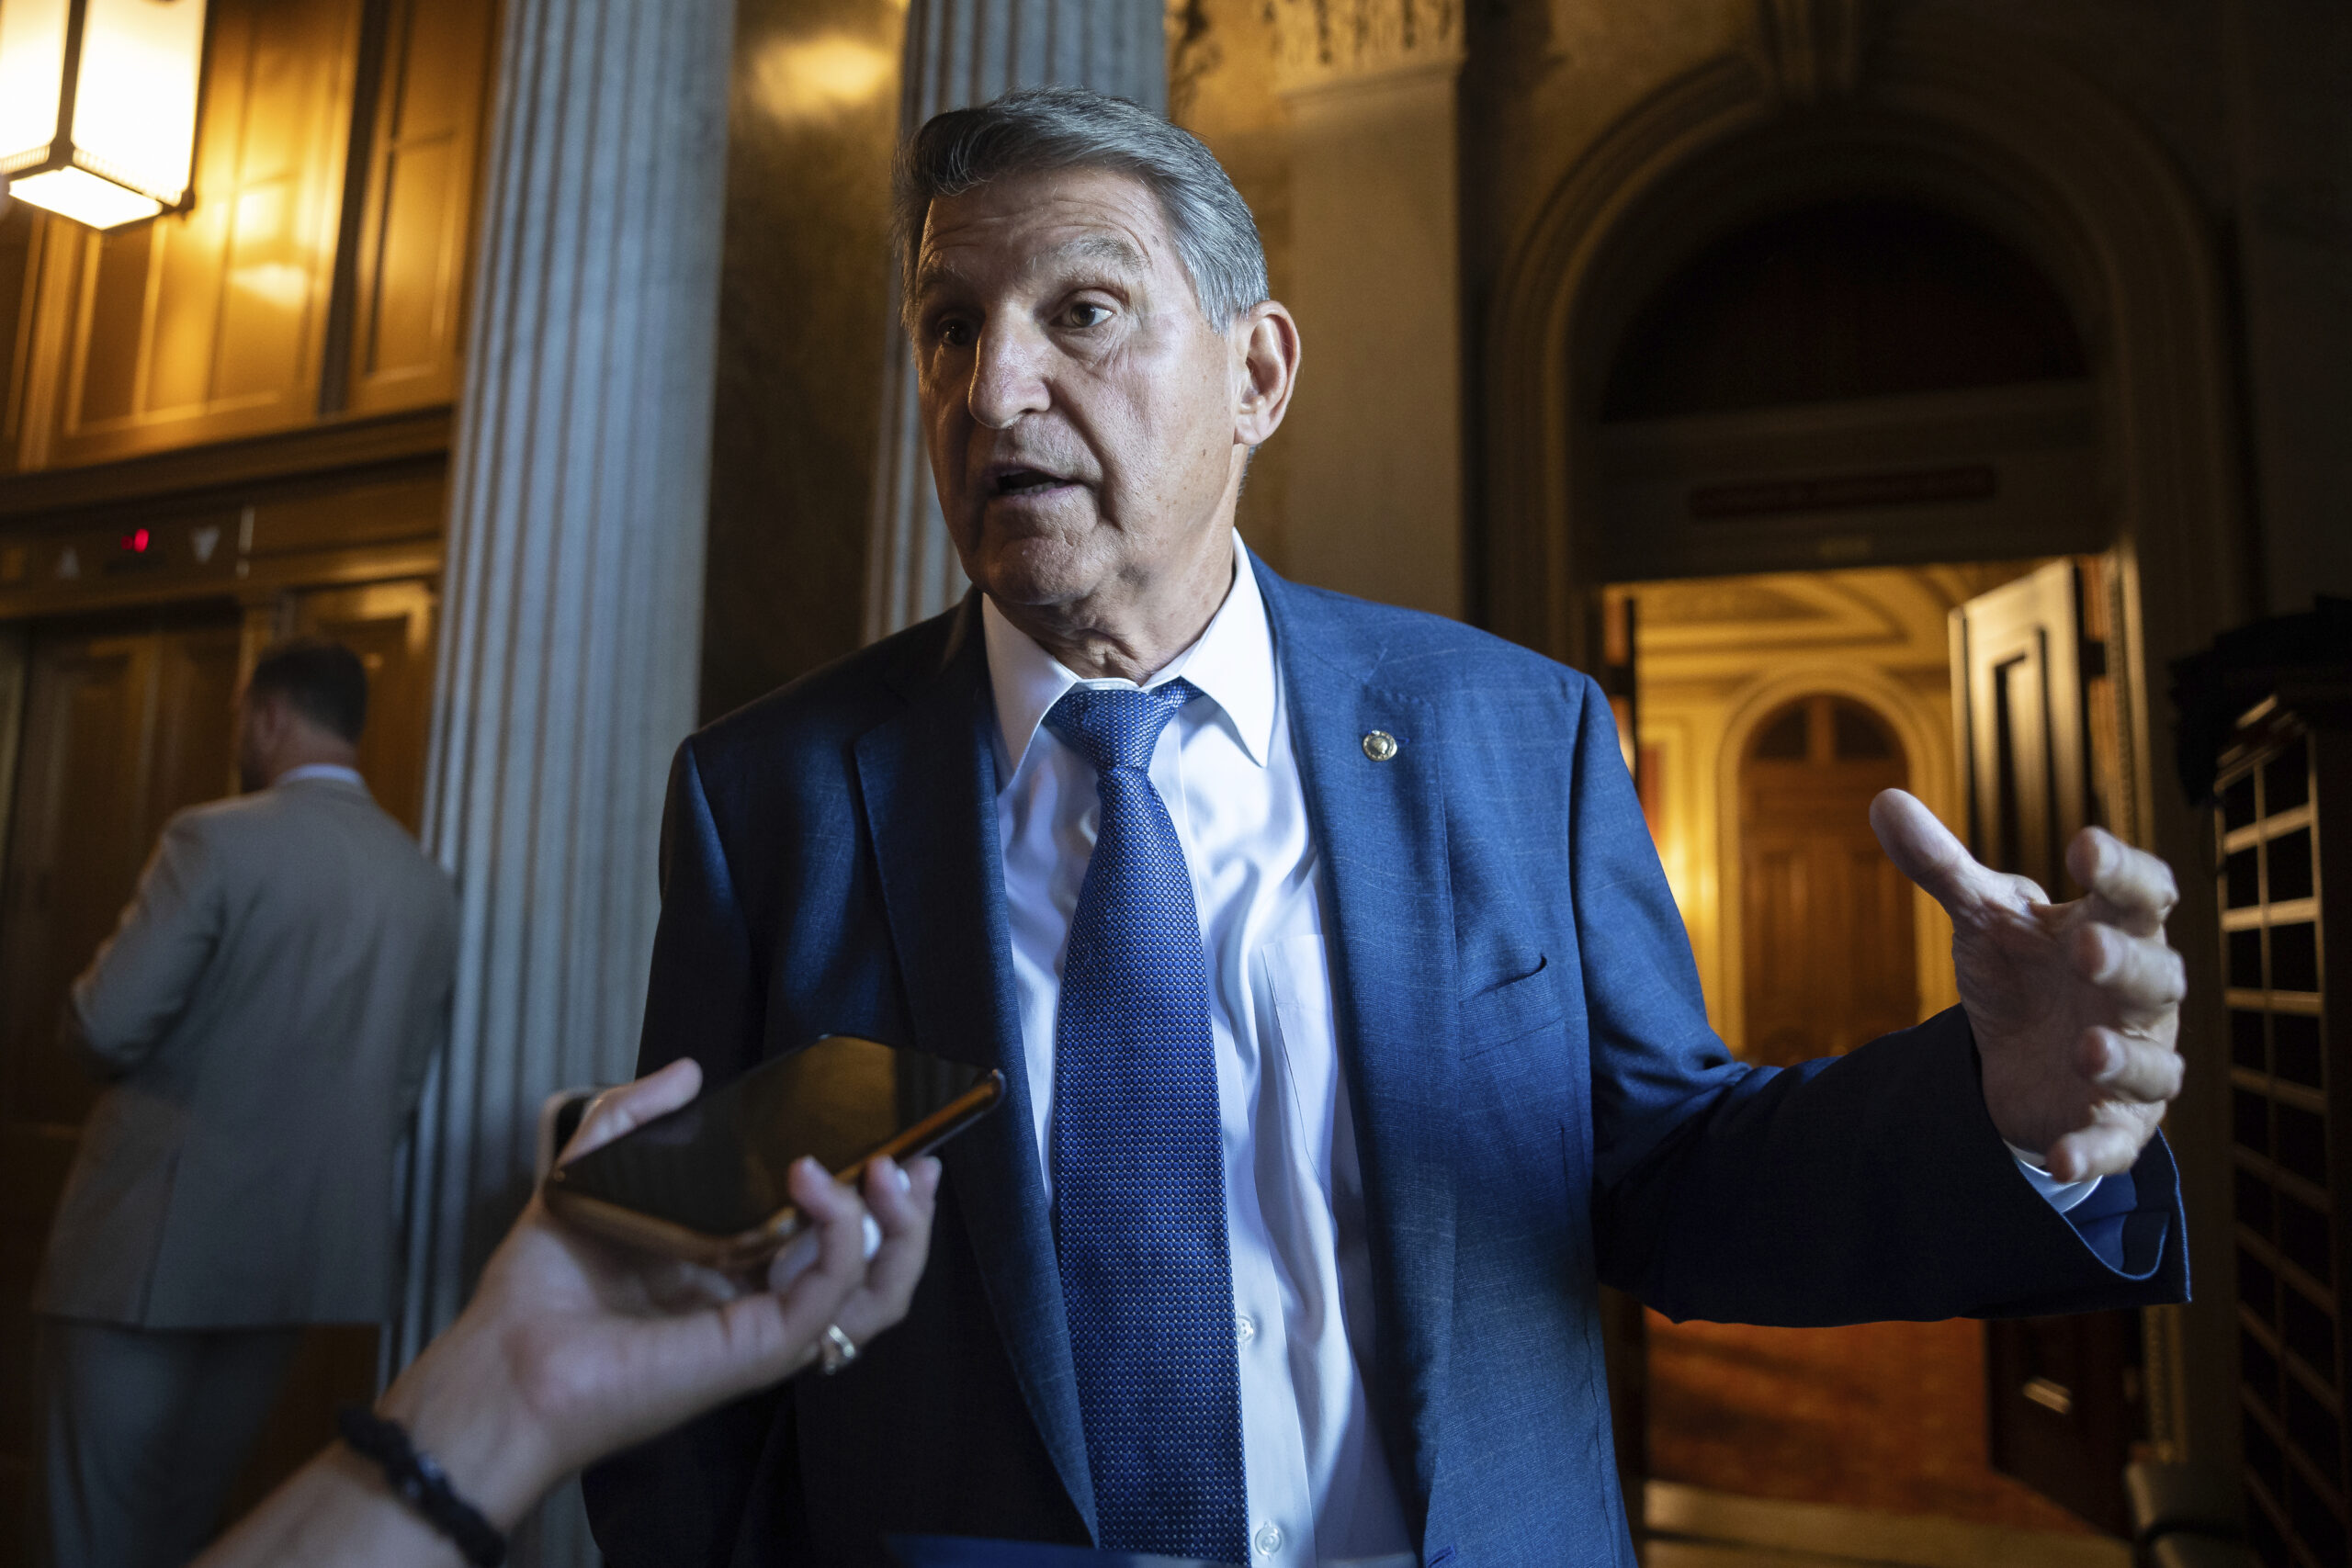 Manchin criticizes leading VA nominee for their stance on abortion.